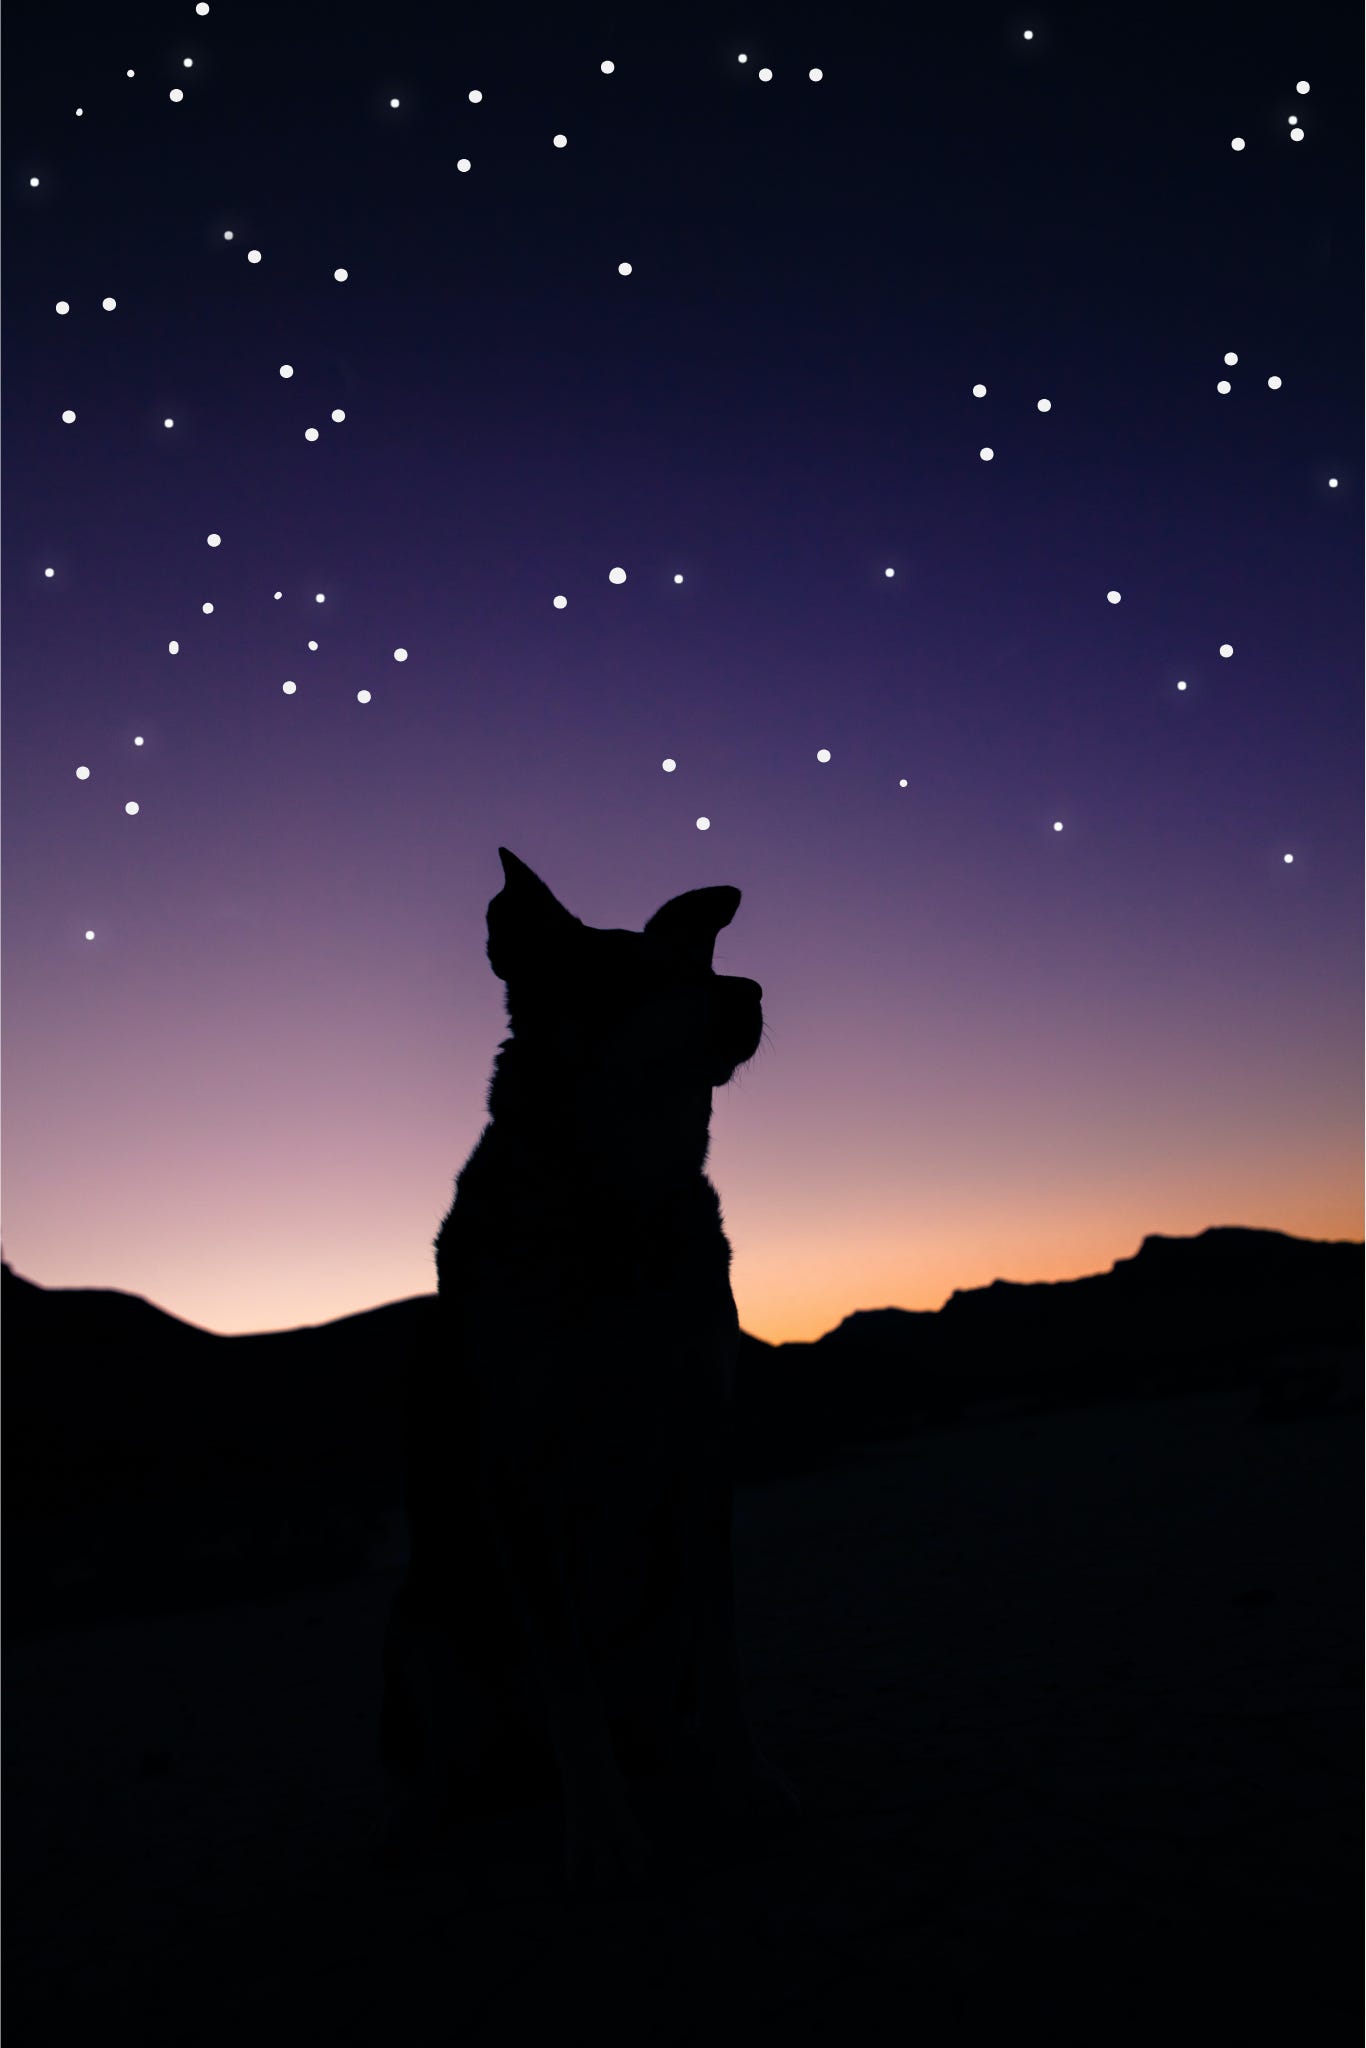 A photo of the black silhouette of a dog standing against a dark sky. The rugged terrain is silhouetted in the background by a fading purple sunset. White dots of stars are scattered across the sky.